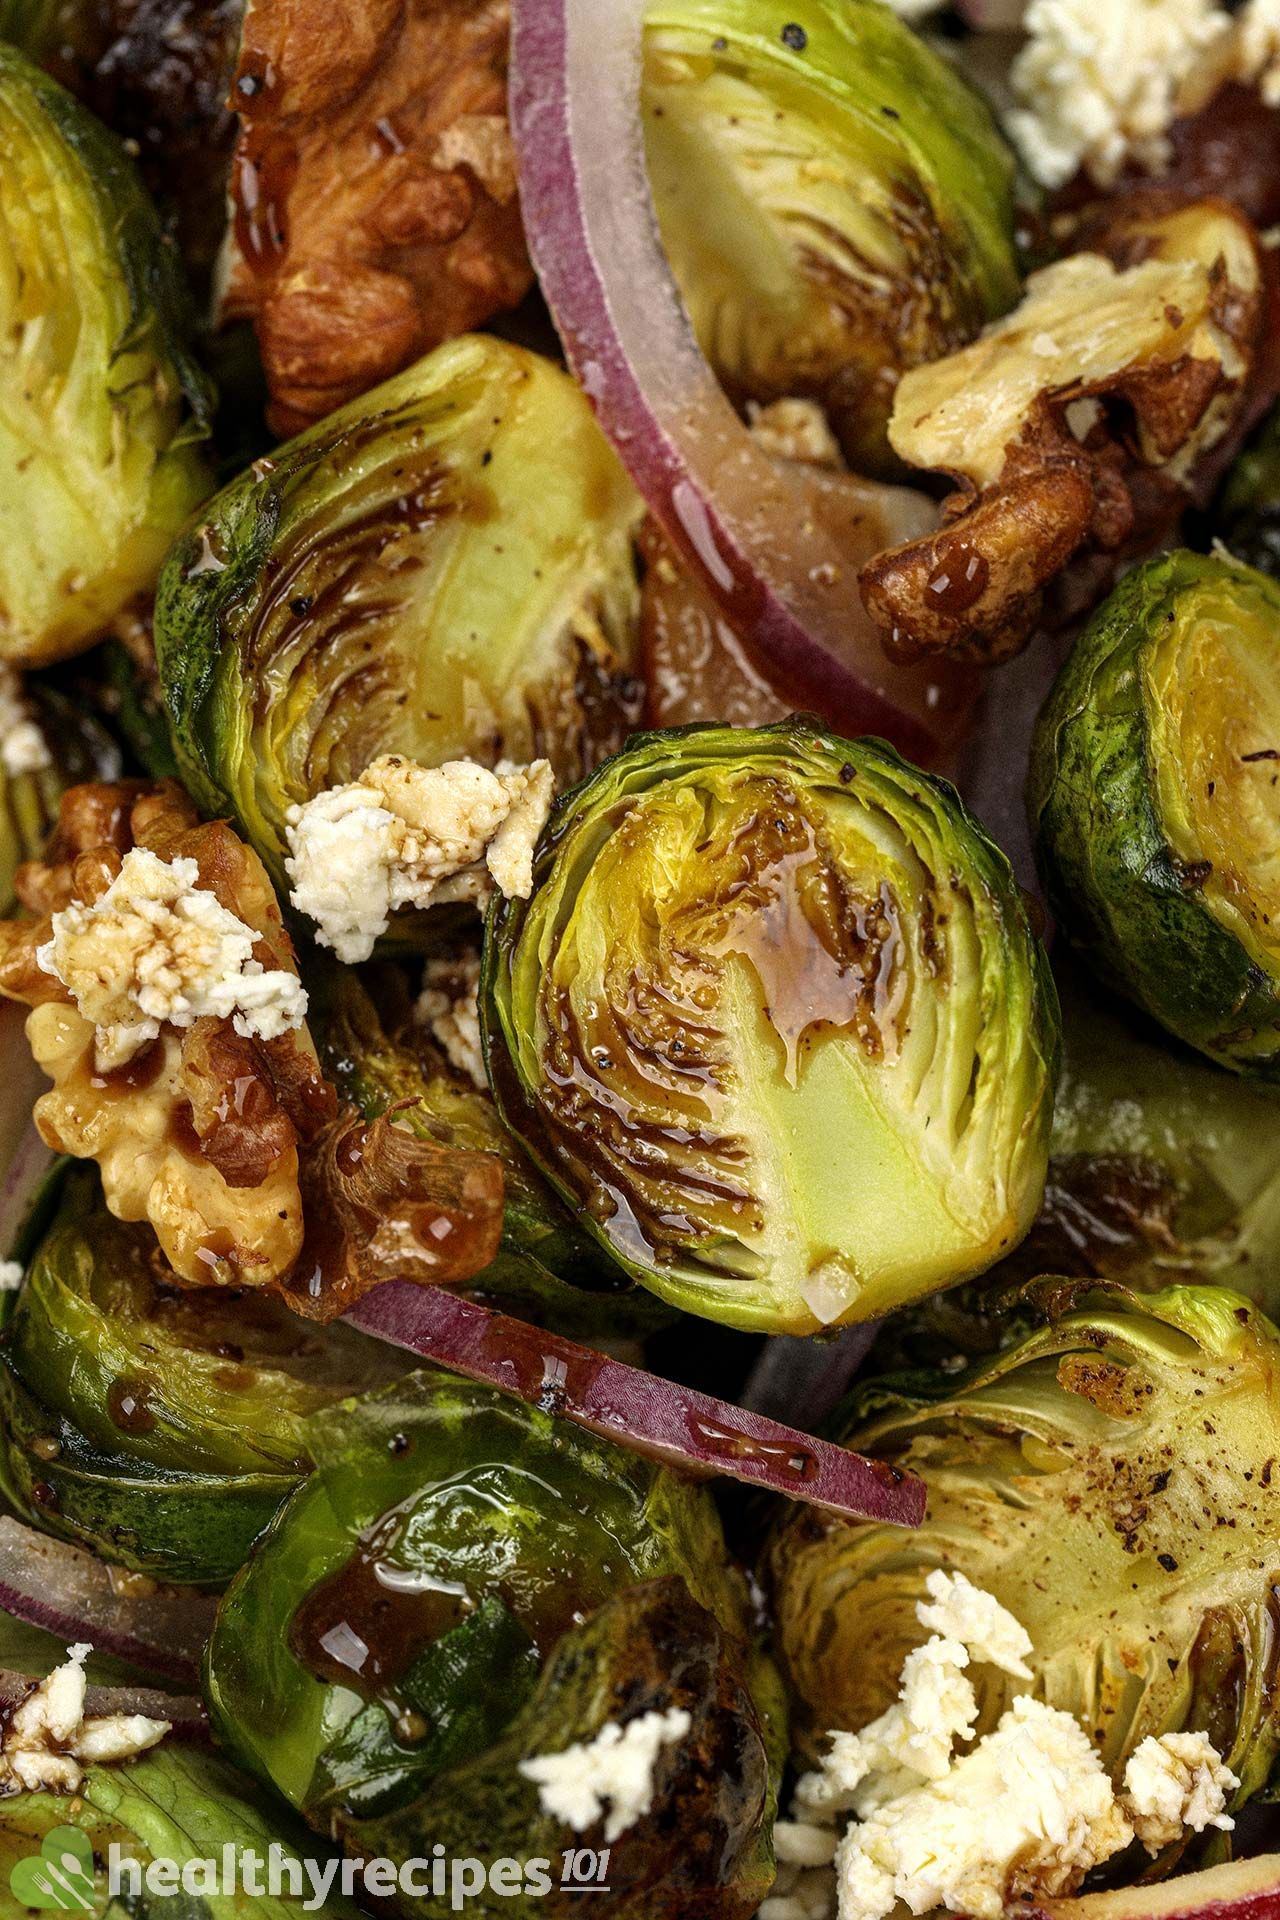 Homemade Grilled Brussel Sprout Salad Recipe